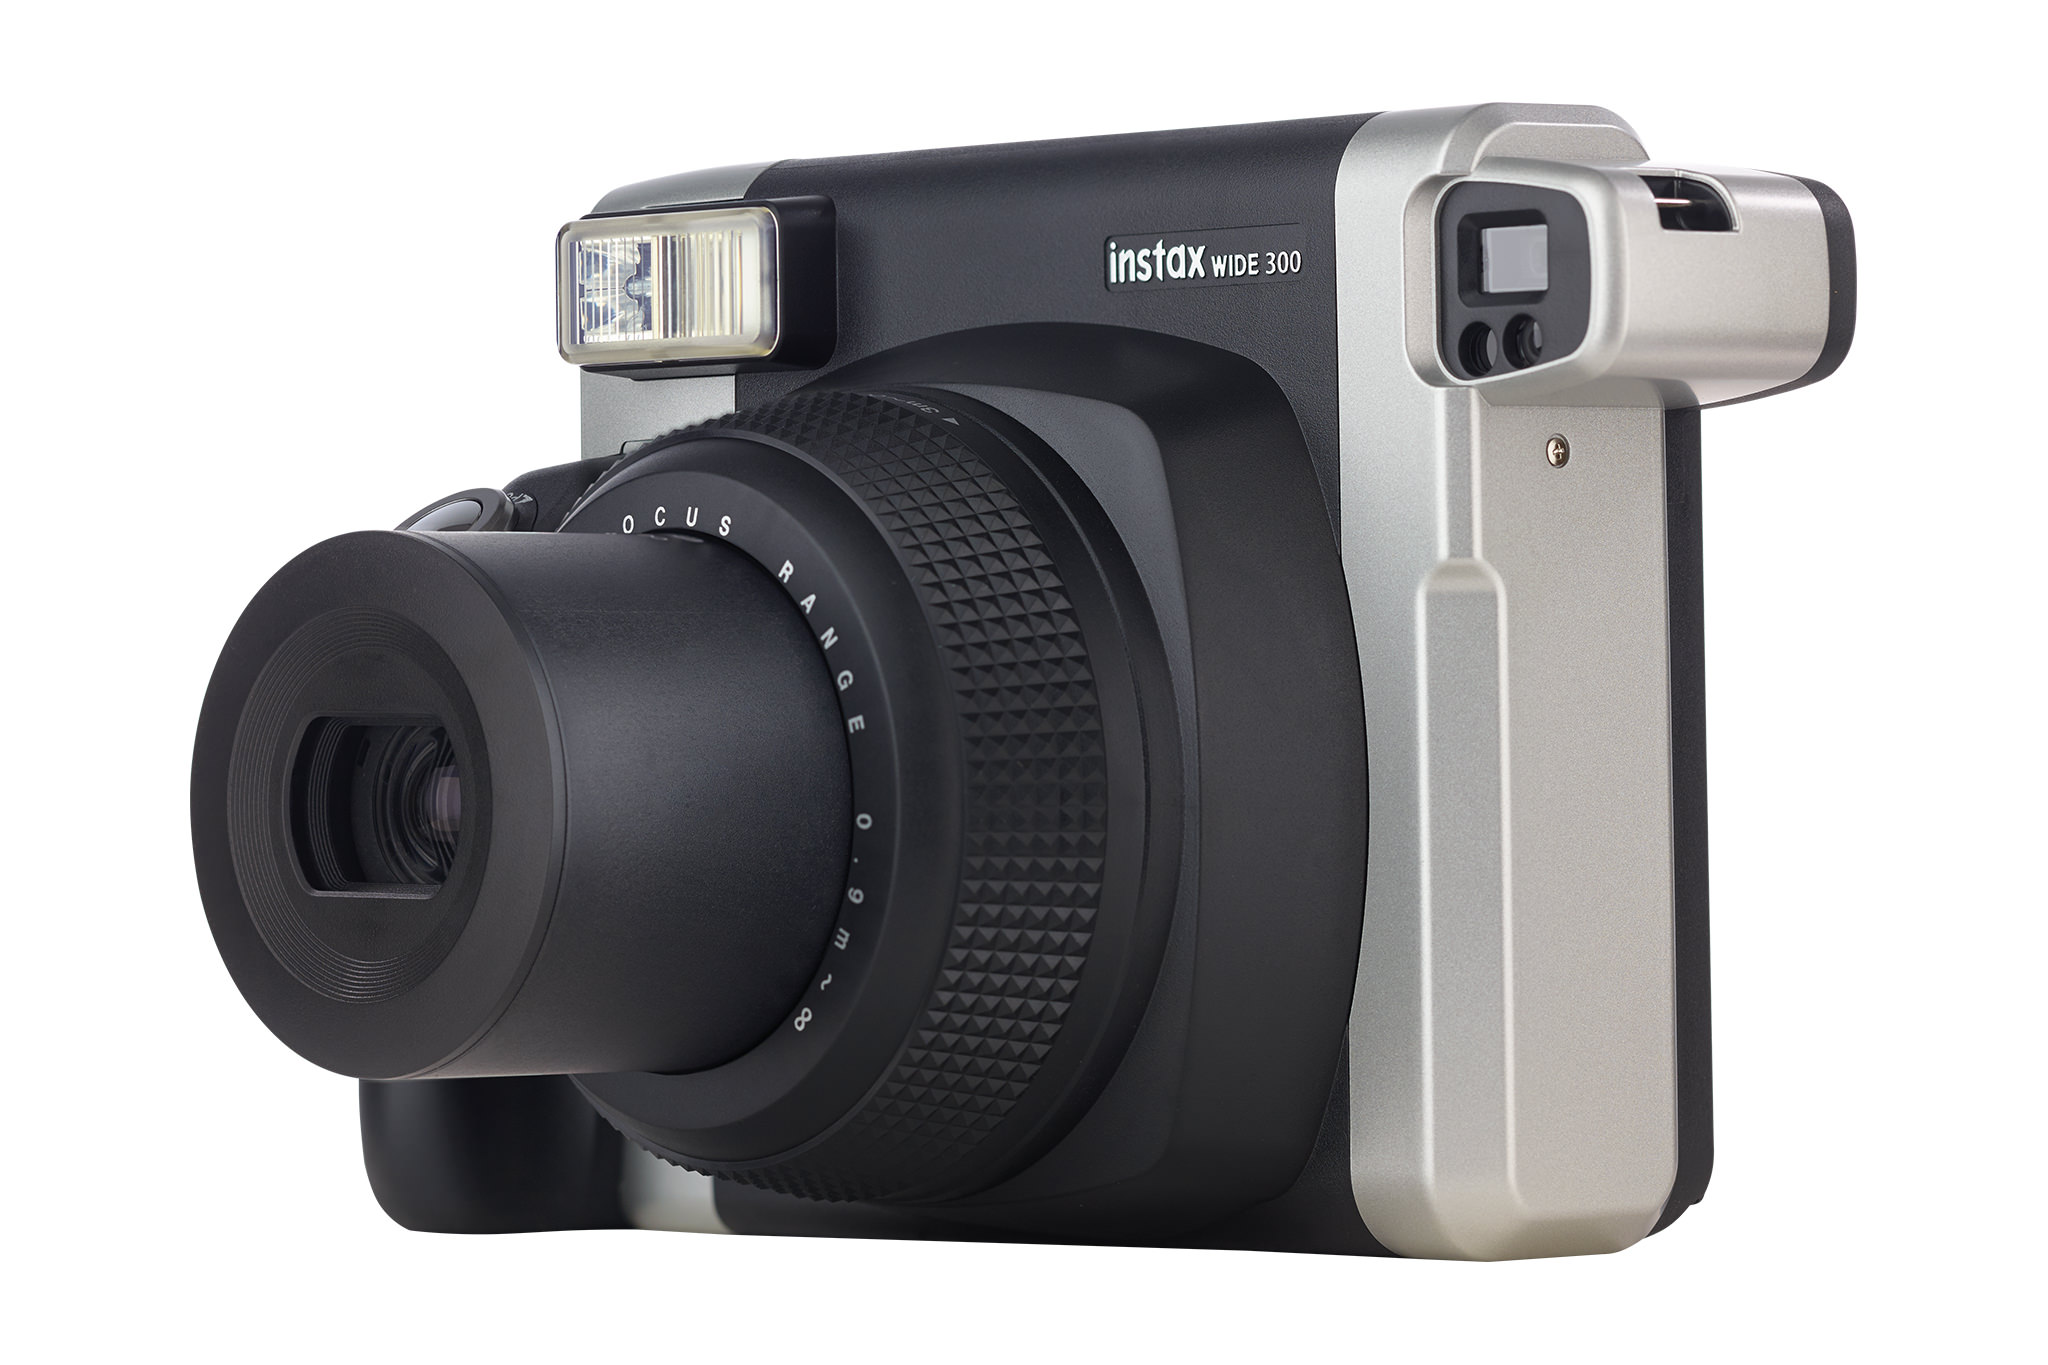 Fujifilm Instax Wide camera the films - of functions 300 and instant